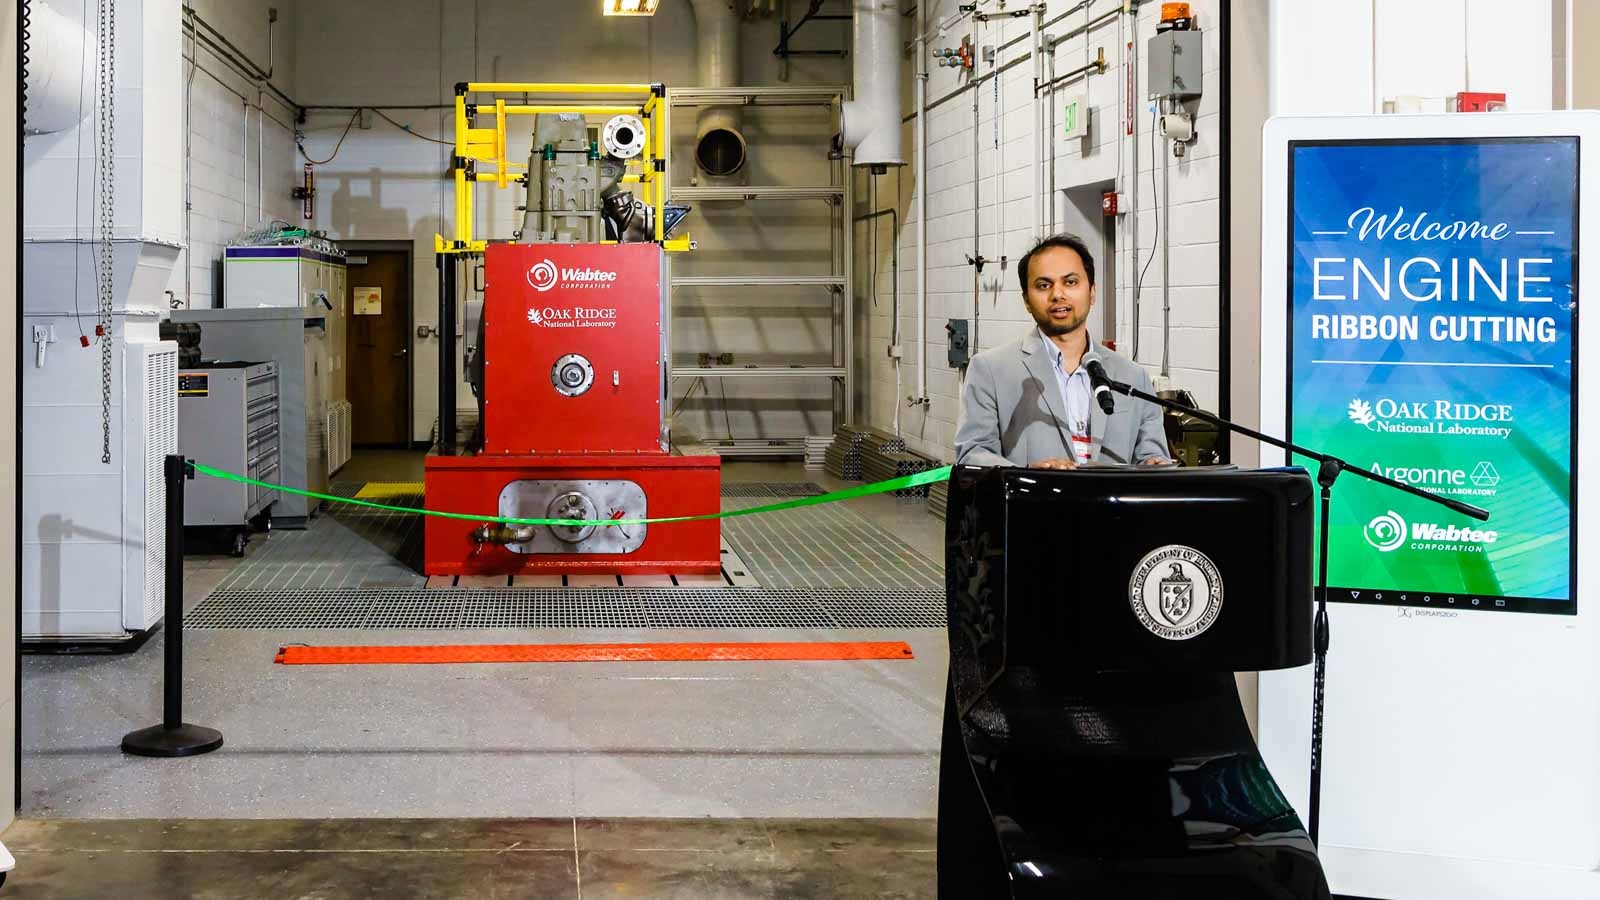 Part of a team studying the potential of hydrogen-powered trains, Argonne senior research scientist Muhsin Ameen is developing a modeling framework to study combustion and emission control technologies used in hydrogen combustion engines.